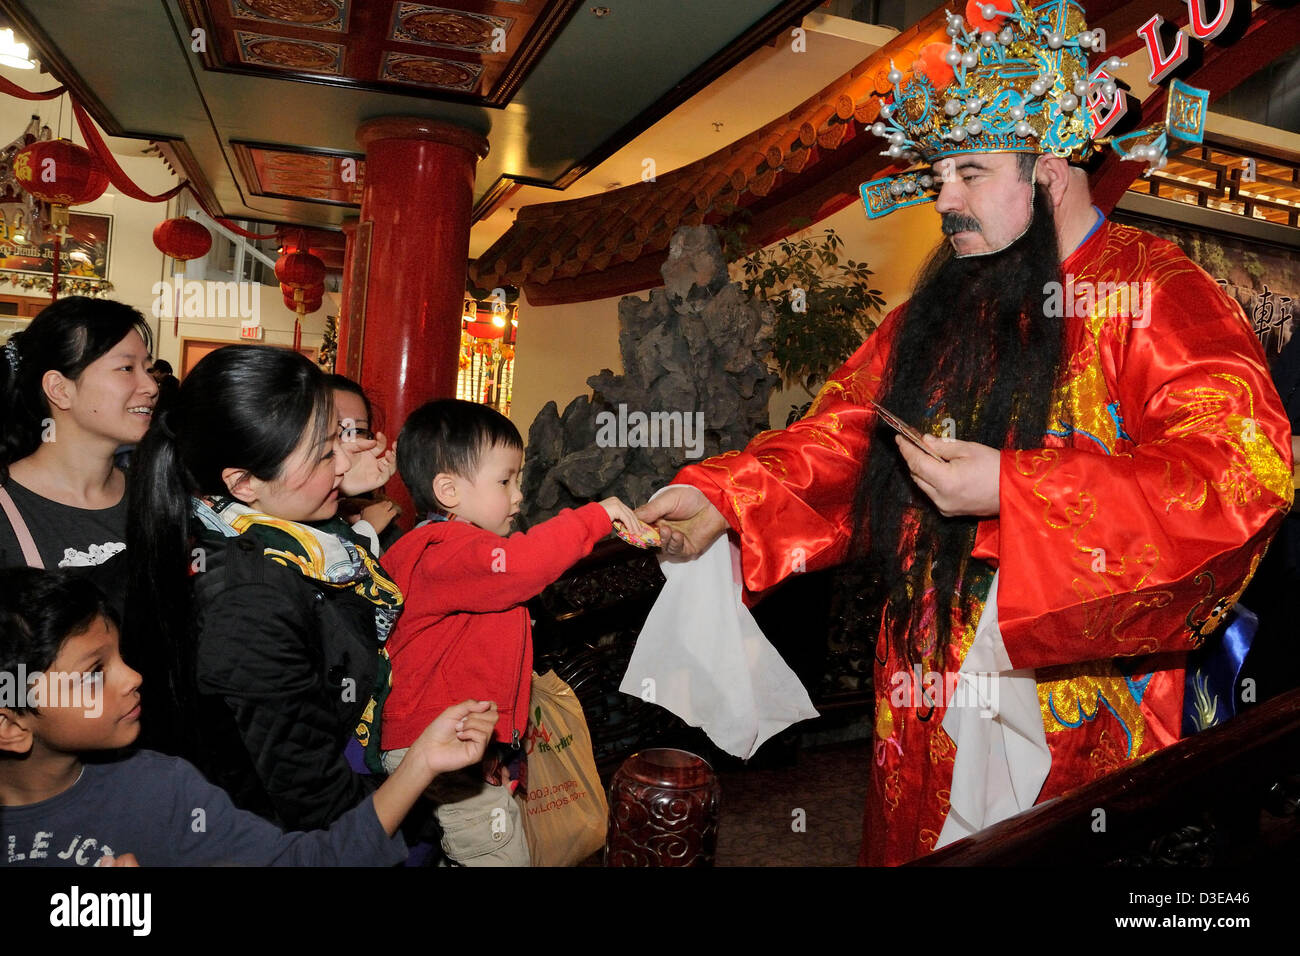 February 16, 2013. Toronto, Canada. Staff at Pacific Mall dressed up as Chinese God of Wealth - Tsai Shen Yeh, money god, handing out red envelops to children and shoppers as good luck and fortune celebrating the Chinese New Year. In picture, 3 year old Brendan Chan reaches out for the red envelope.  (DCP/N8N) Stock Photo